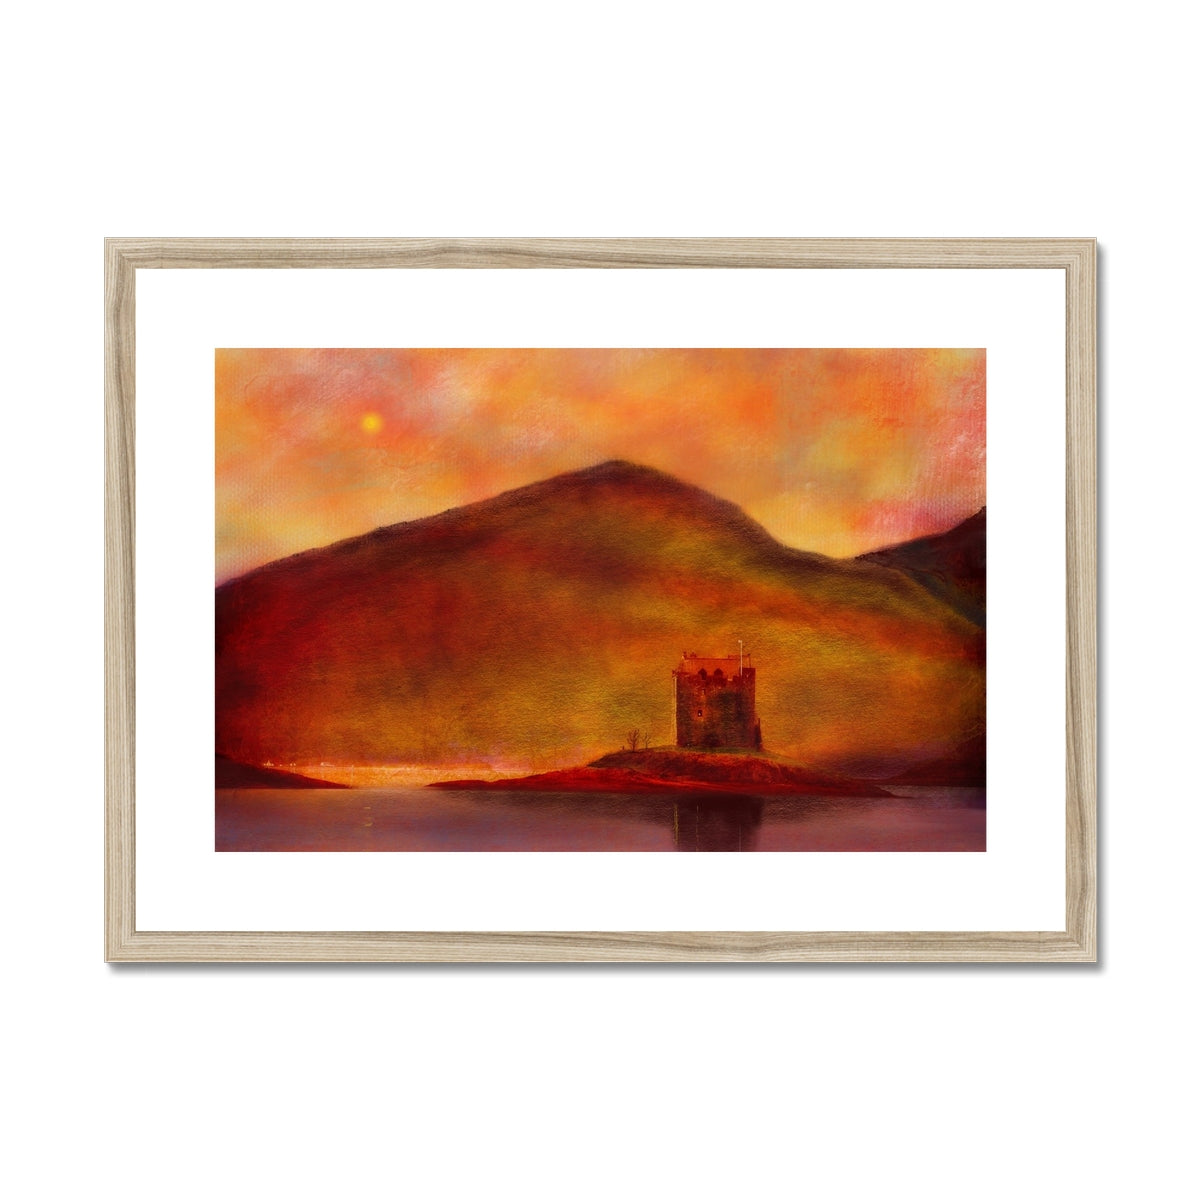 Castle Stalker Sunset Painting | Framed & Mounted Prints From Scotland-Framed & Mounted Prints-Historic & Iconic Scotland Art Gallery-A2 Landscape-Natural Frame-Paintings, Prints, Homeware, Art Gifts From Scotland By Scottish Artist Kevin Hunter